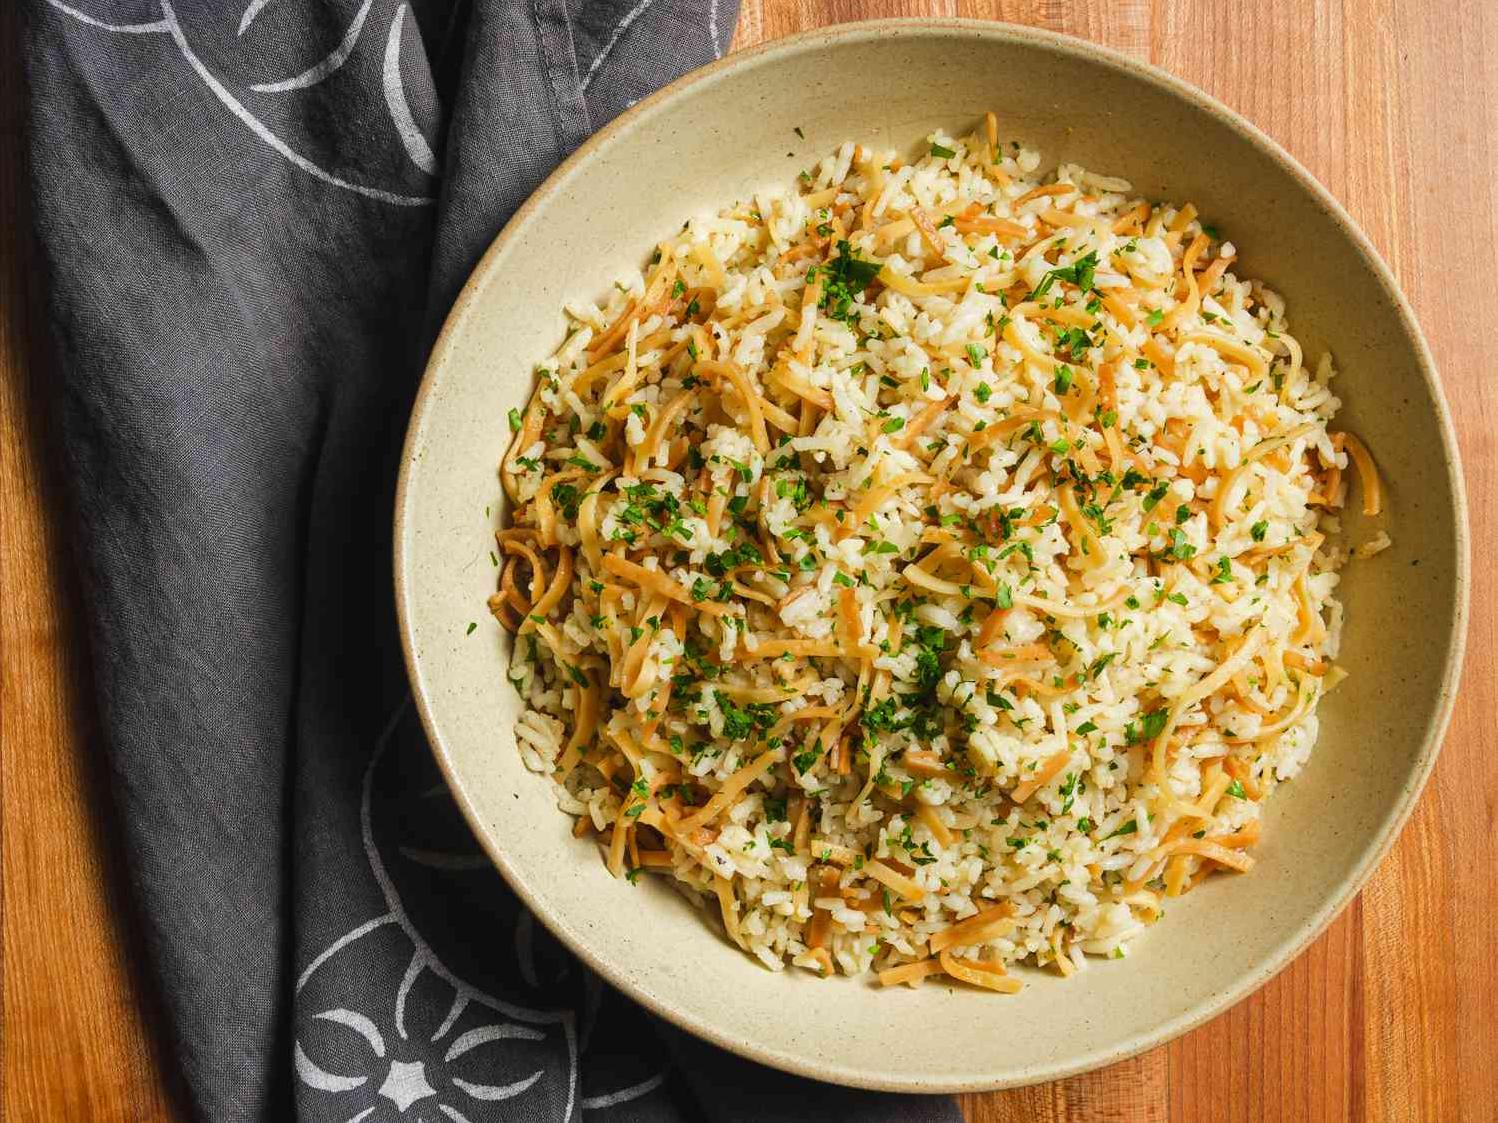  Aromatic spices enhance the flavors of this delicious Armenian pilaf.